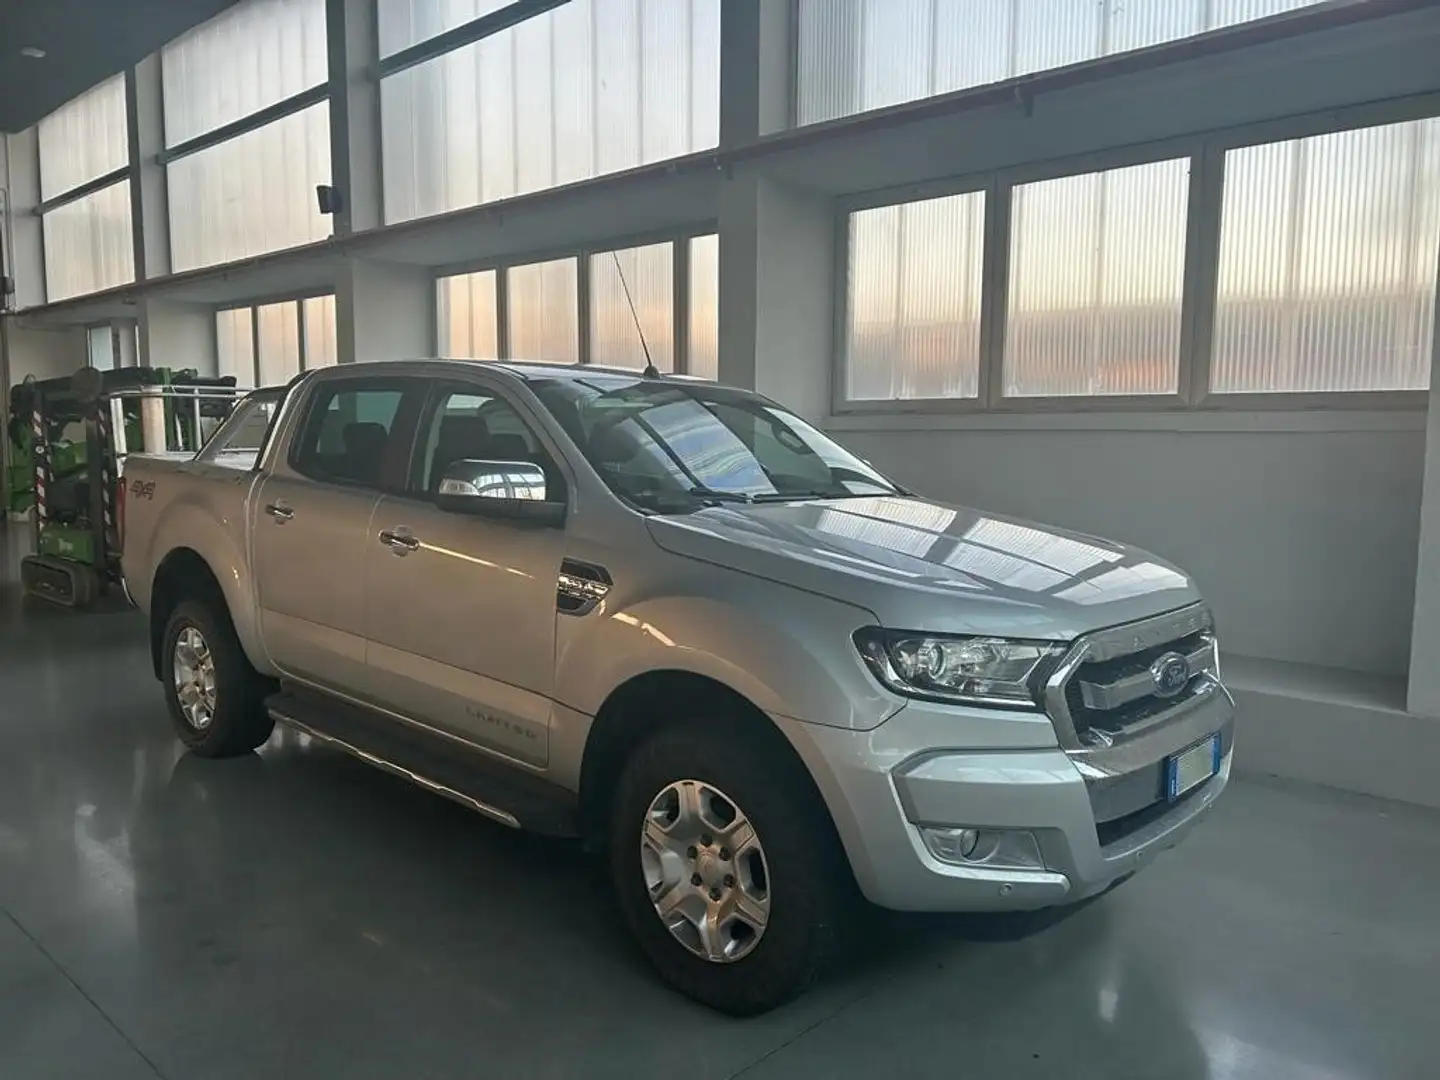 Ford Ranger Ranger VII 2016 3.2 tdci double cab Limited Plateado - 2